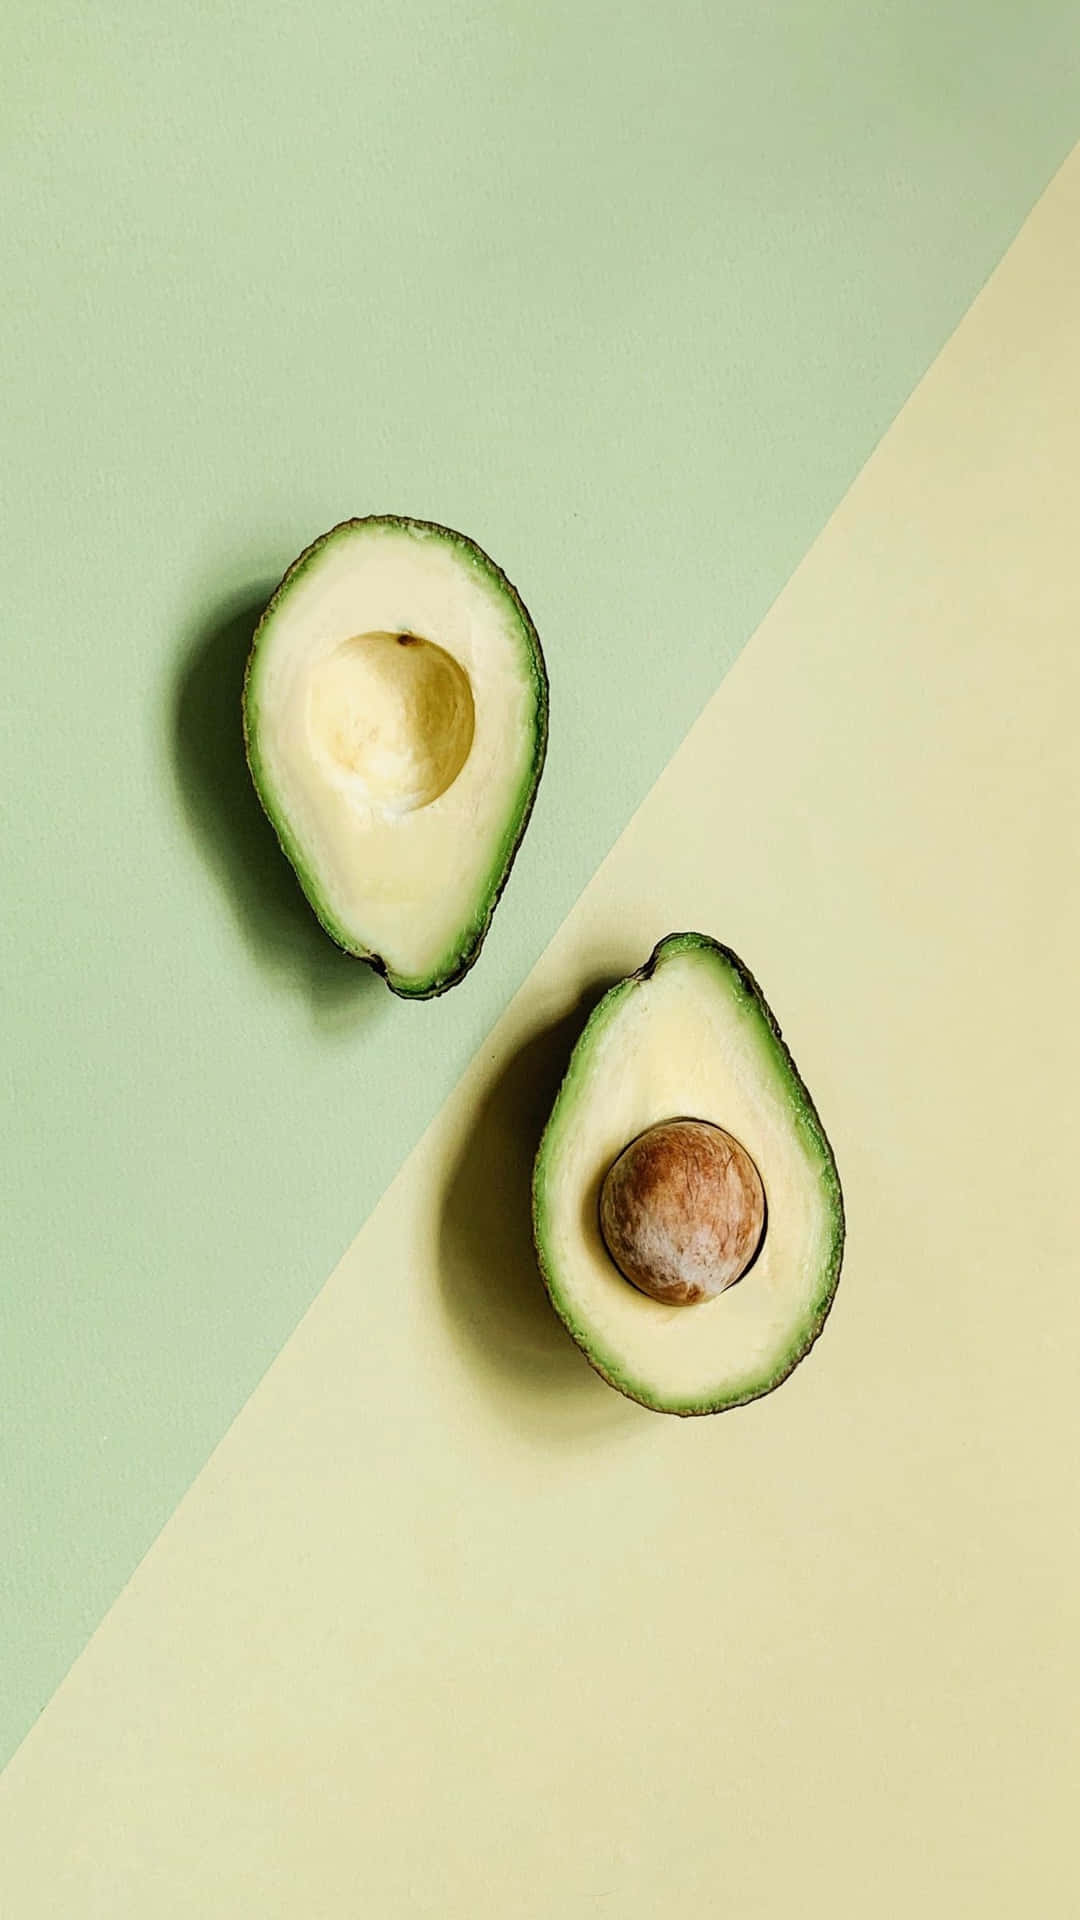 An avocado cut in half on a green and yellow background - Avocado